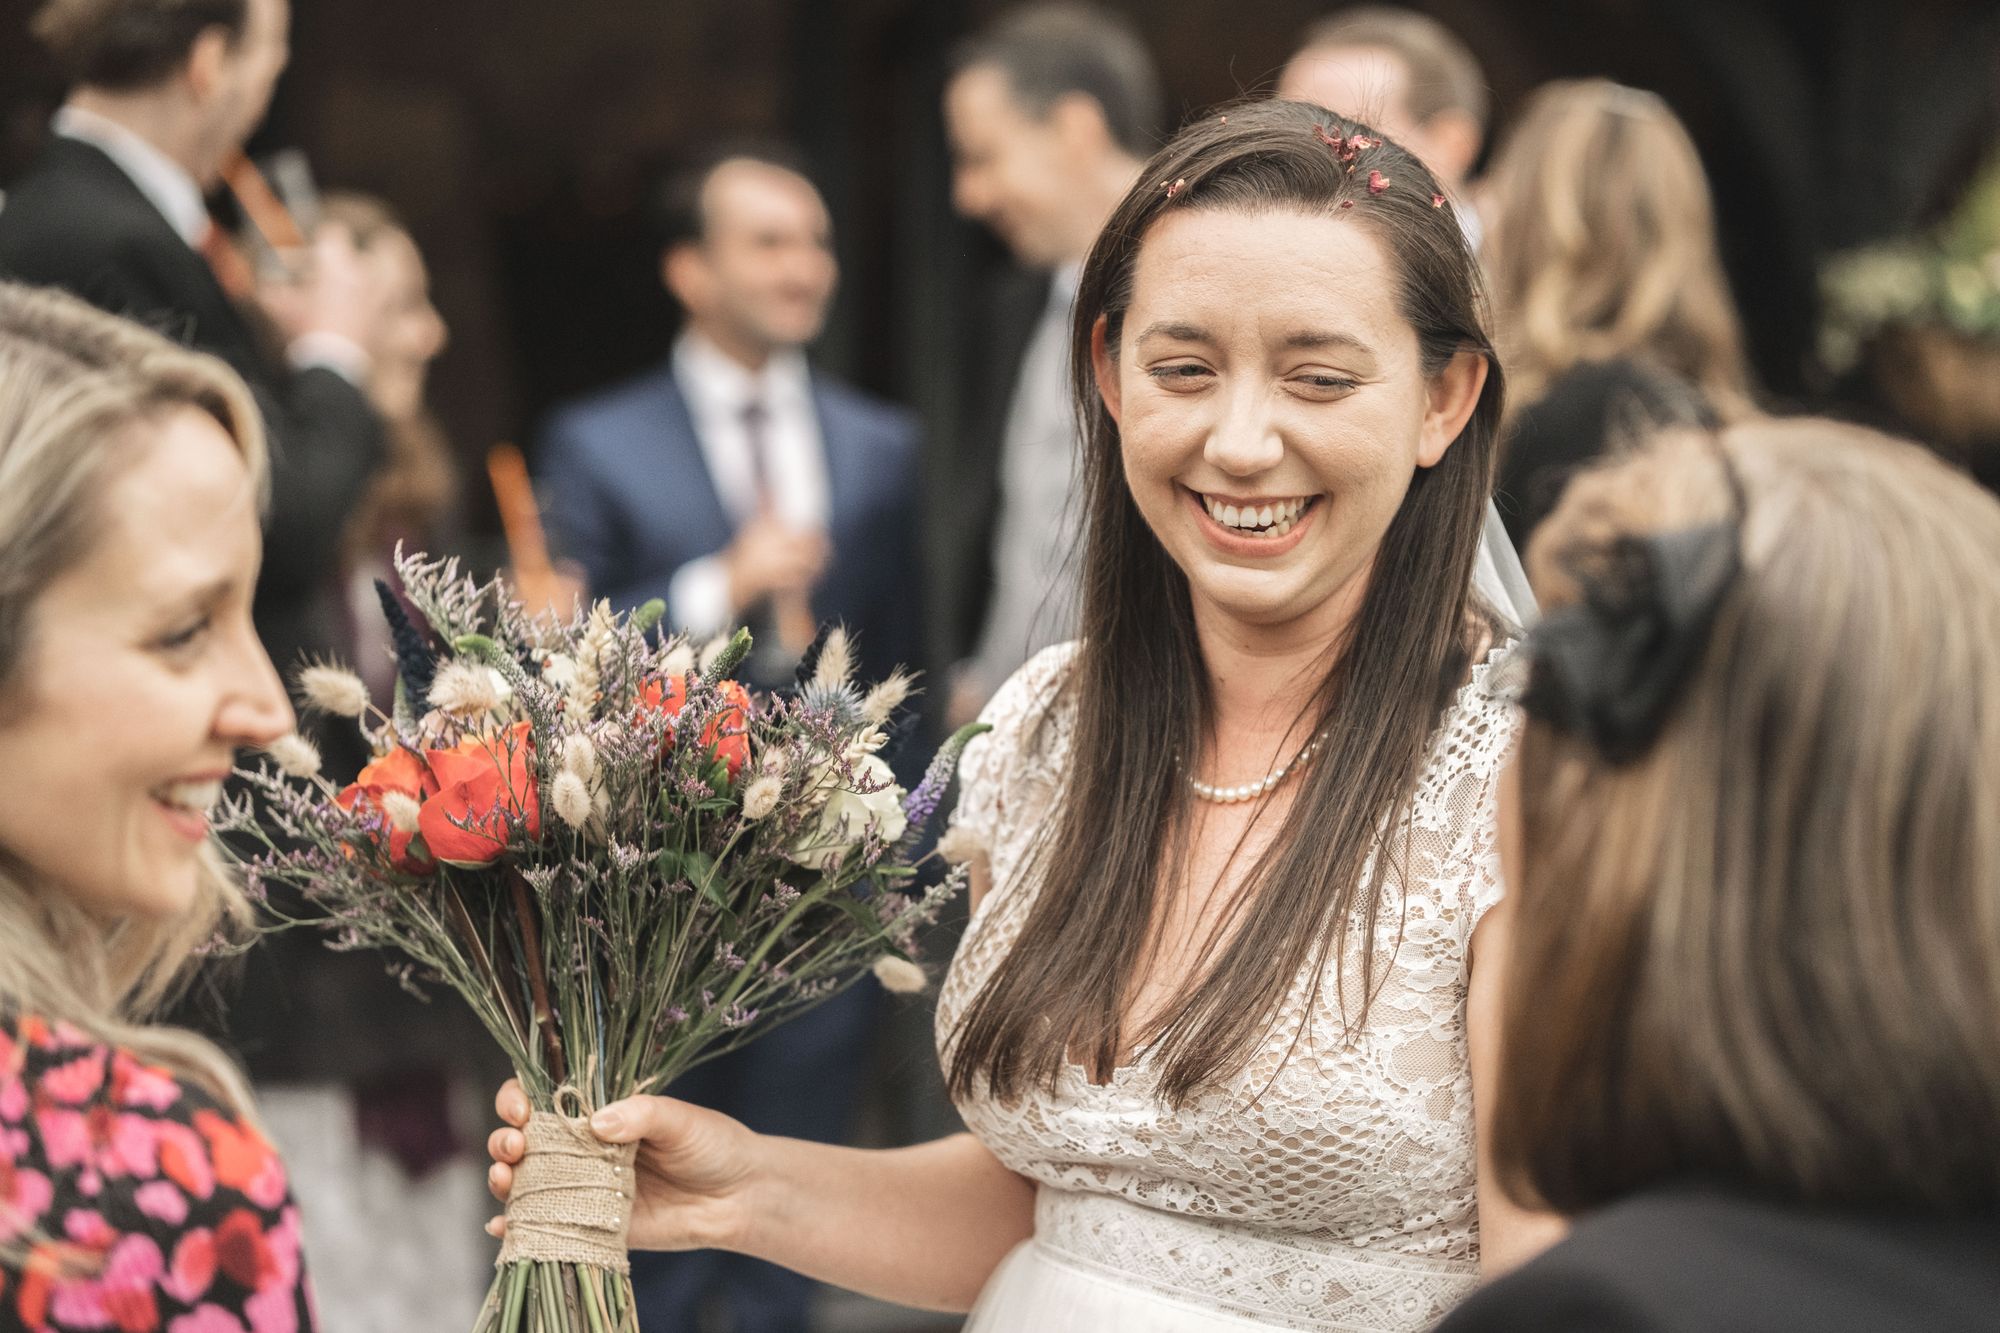 Jennifer smiling whilst chatting to wedding guests holding her beautiful bouquet from Ann Laing. Photo thanks to The Falkenburgs via Big Day Productions